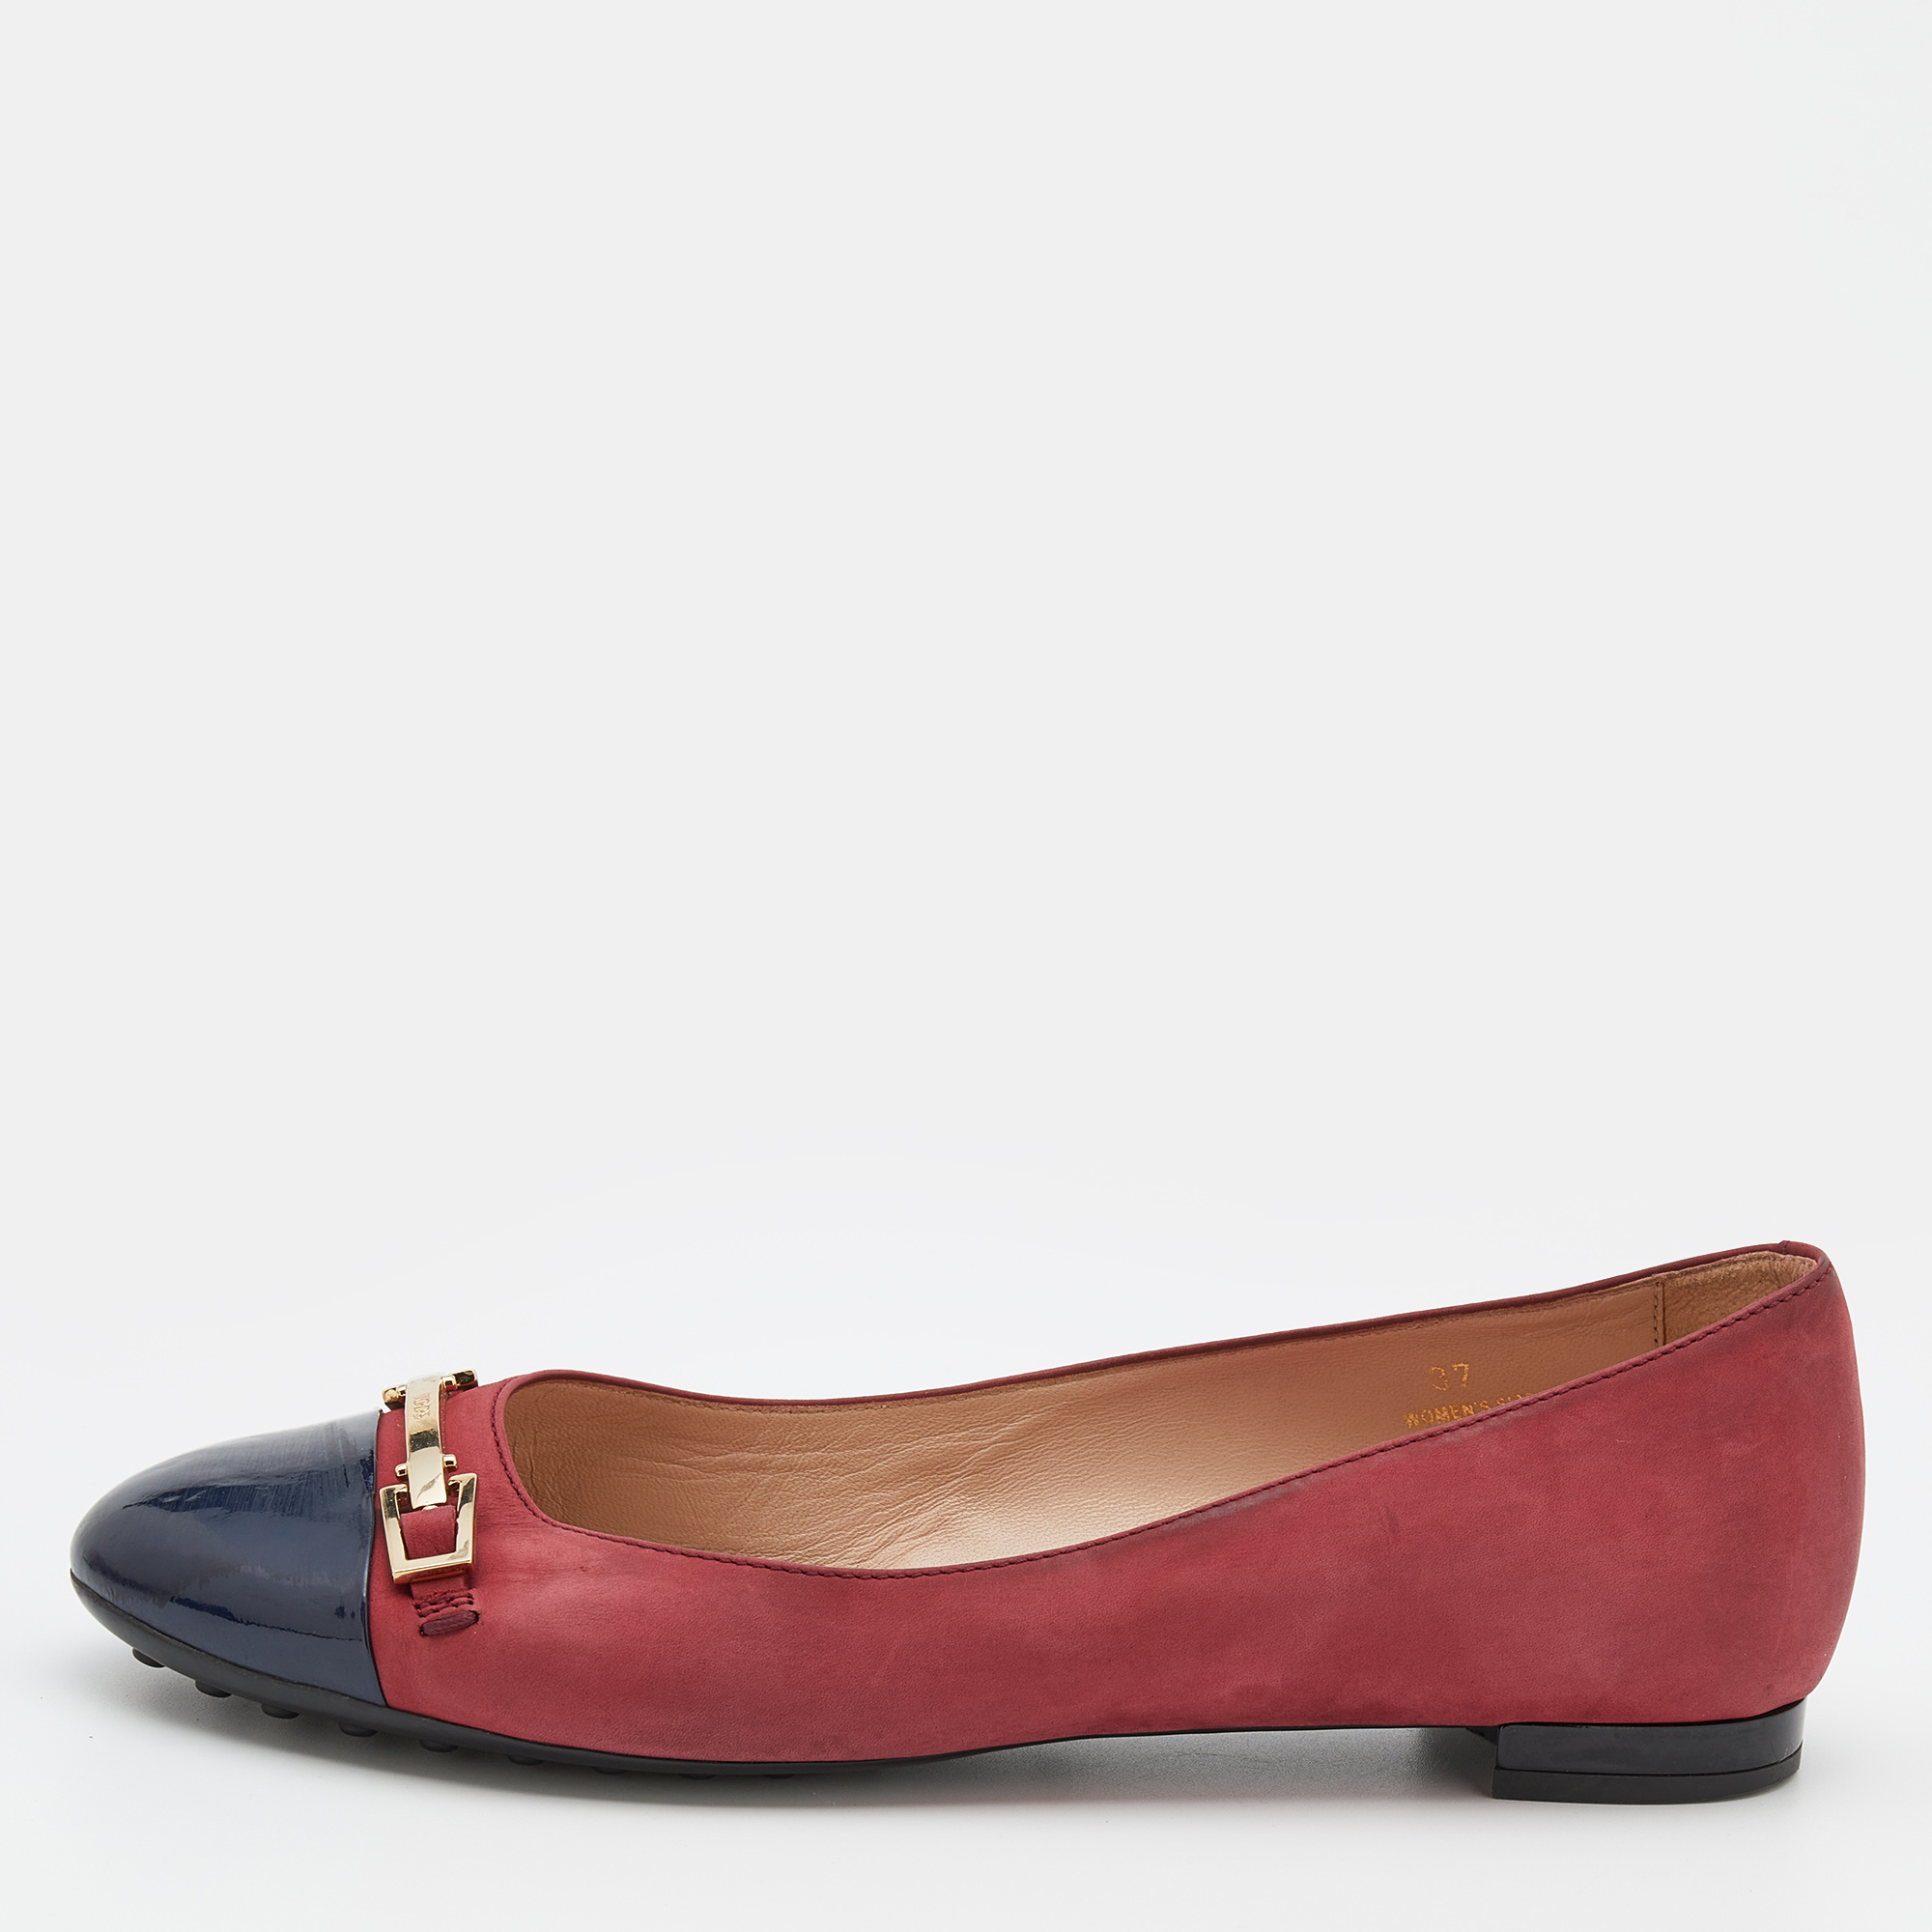 Tod's Crimson Red/Blue Leather And Patent Leather Cap Toe Buckle Ballet Flats Size 37